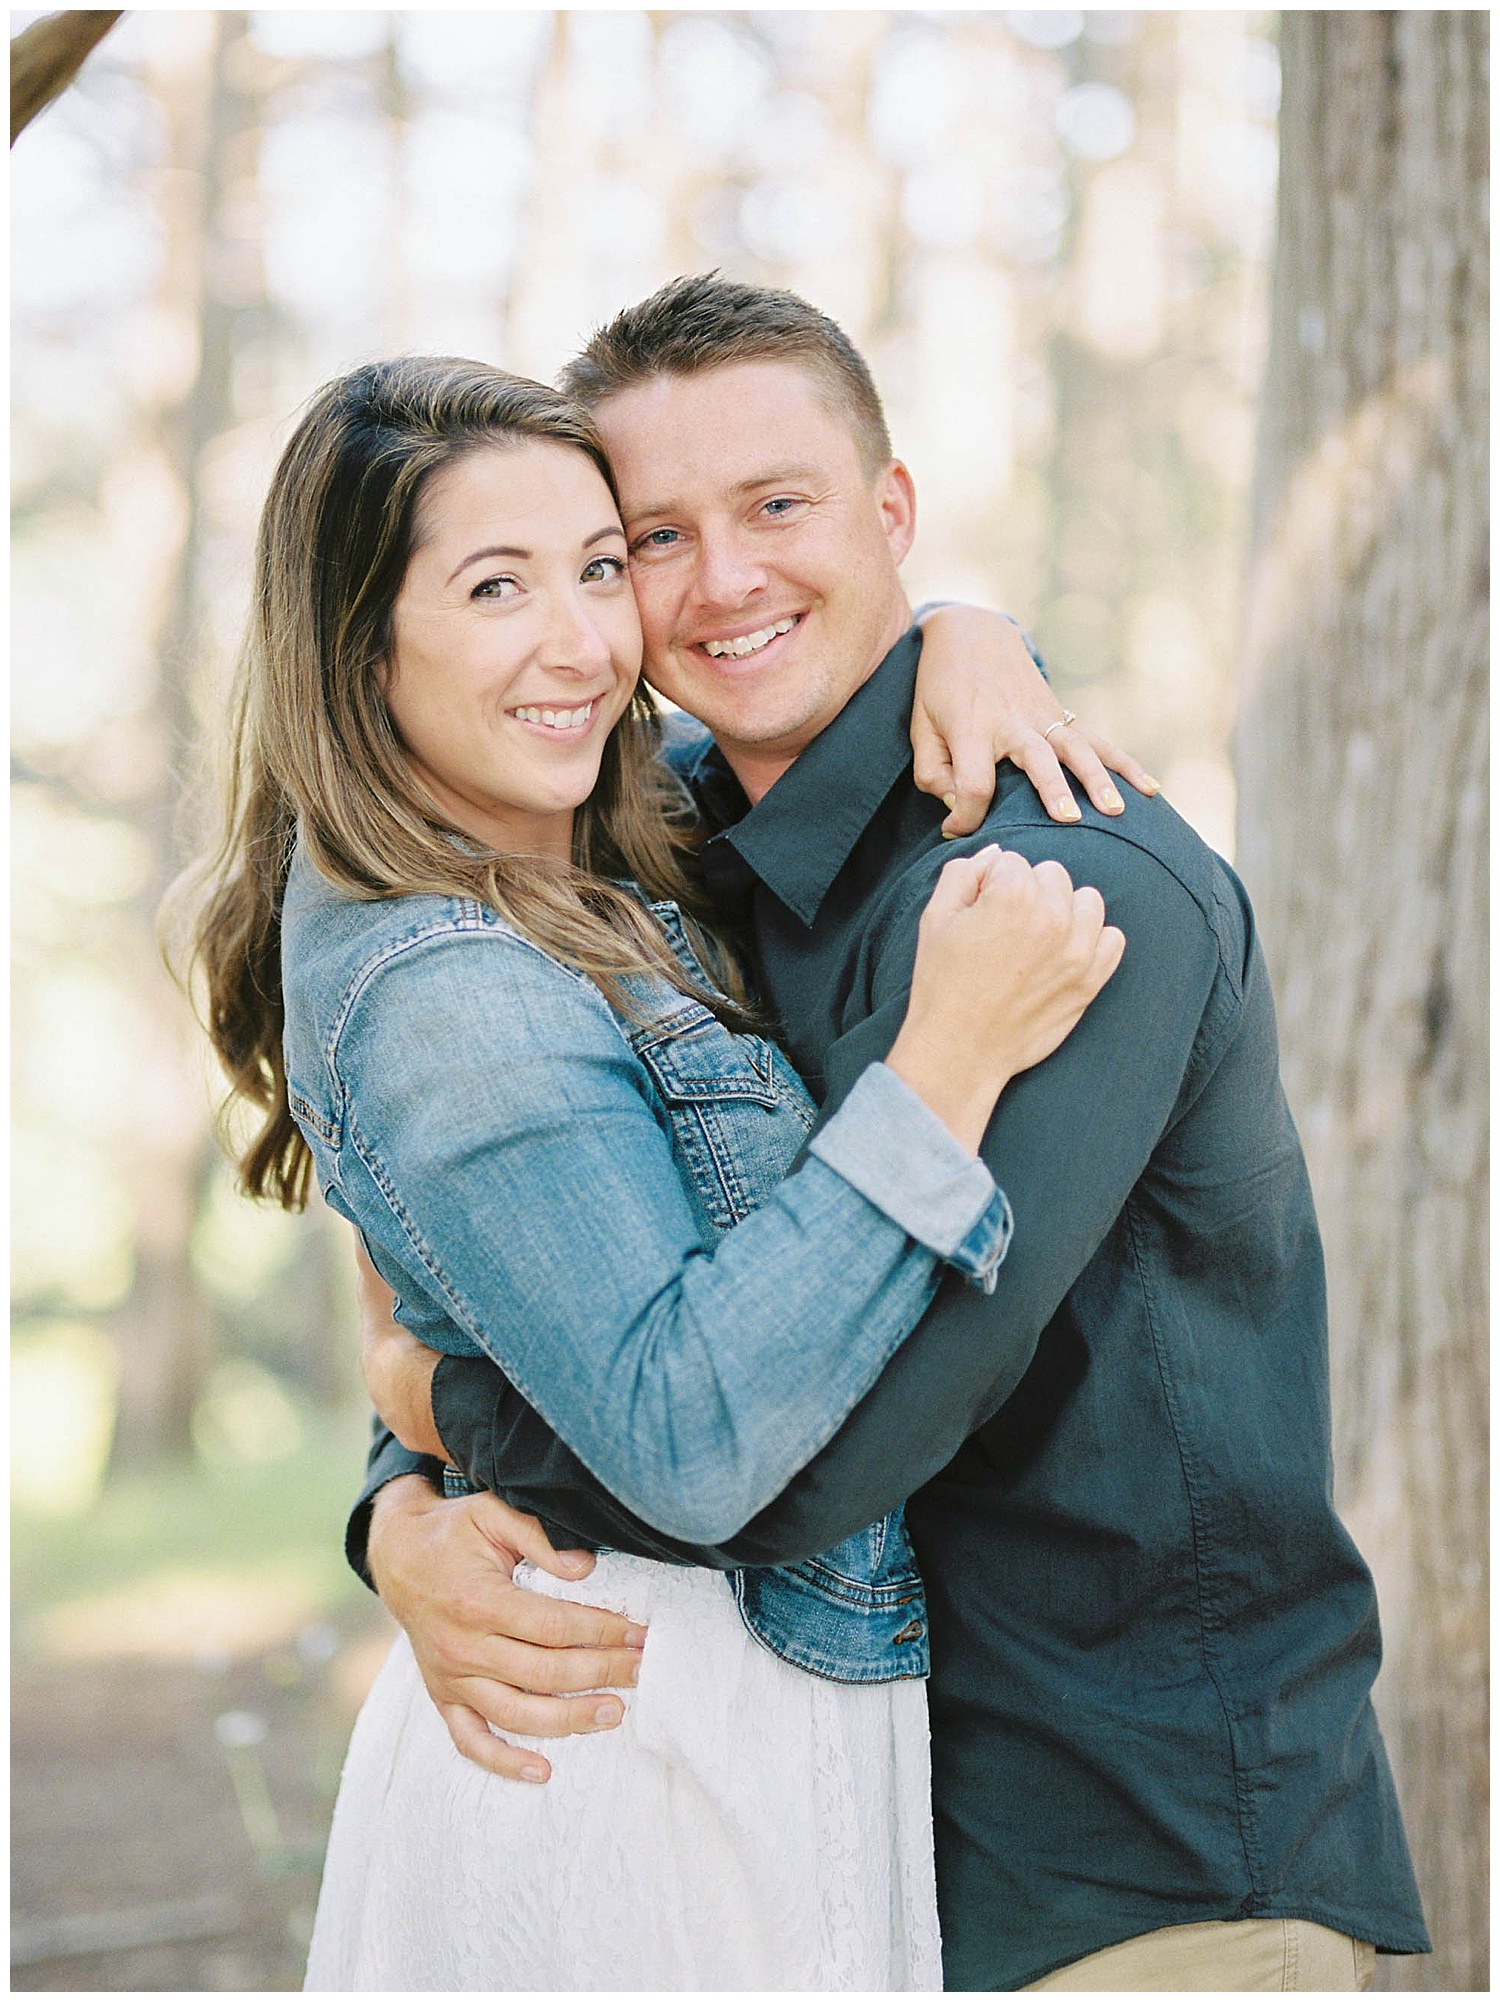 san francisco wedding and portrait photographer shooting an engagement session in half moon bay california using both film and digital medium